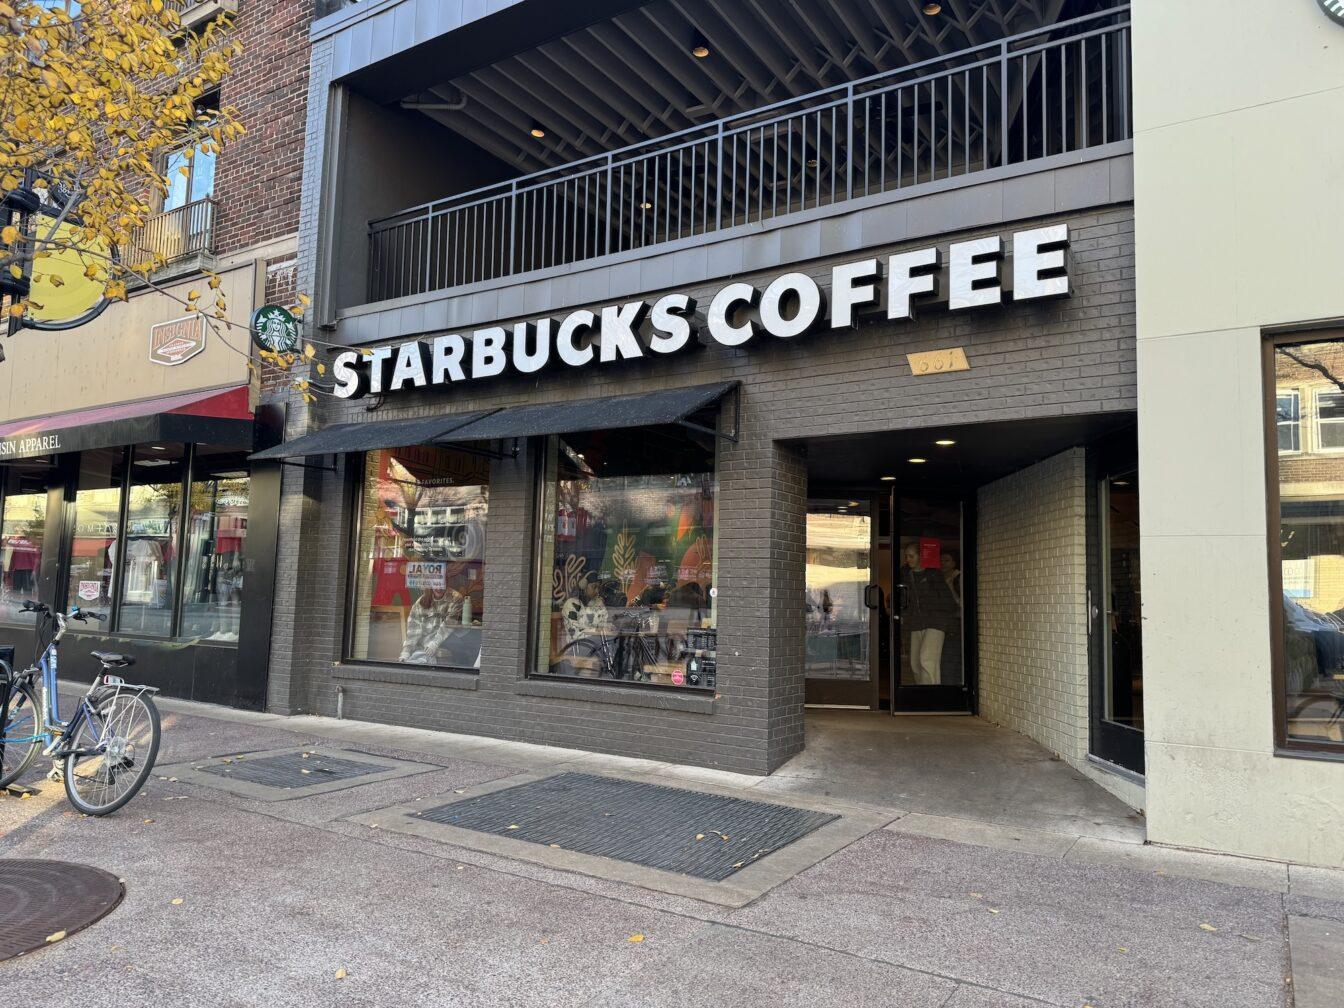 Starbucks rejects State Street request for sharps disposal boxes, health organization vouches for necessity